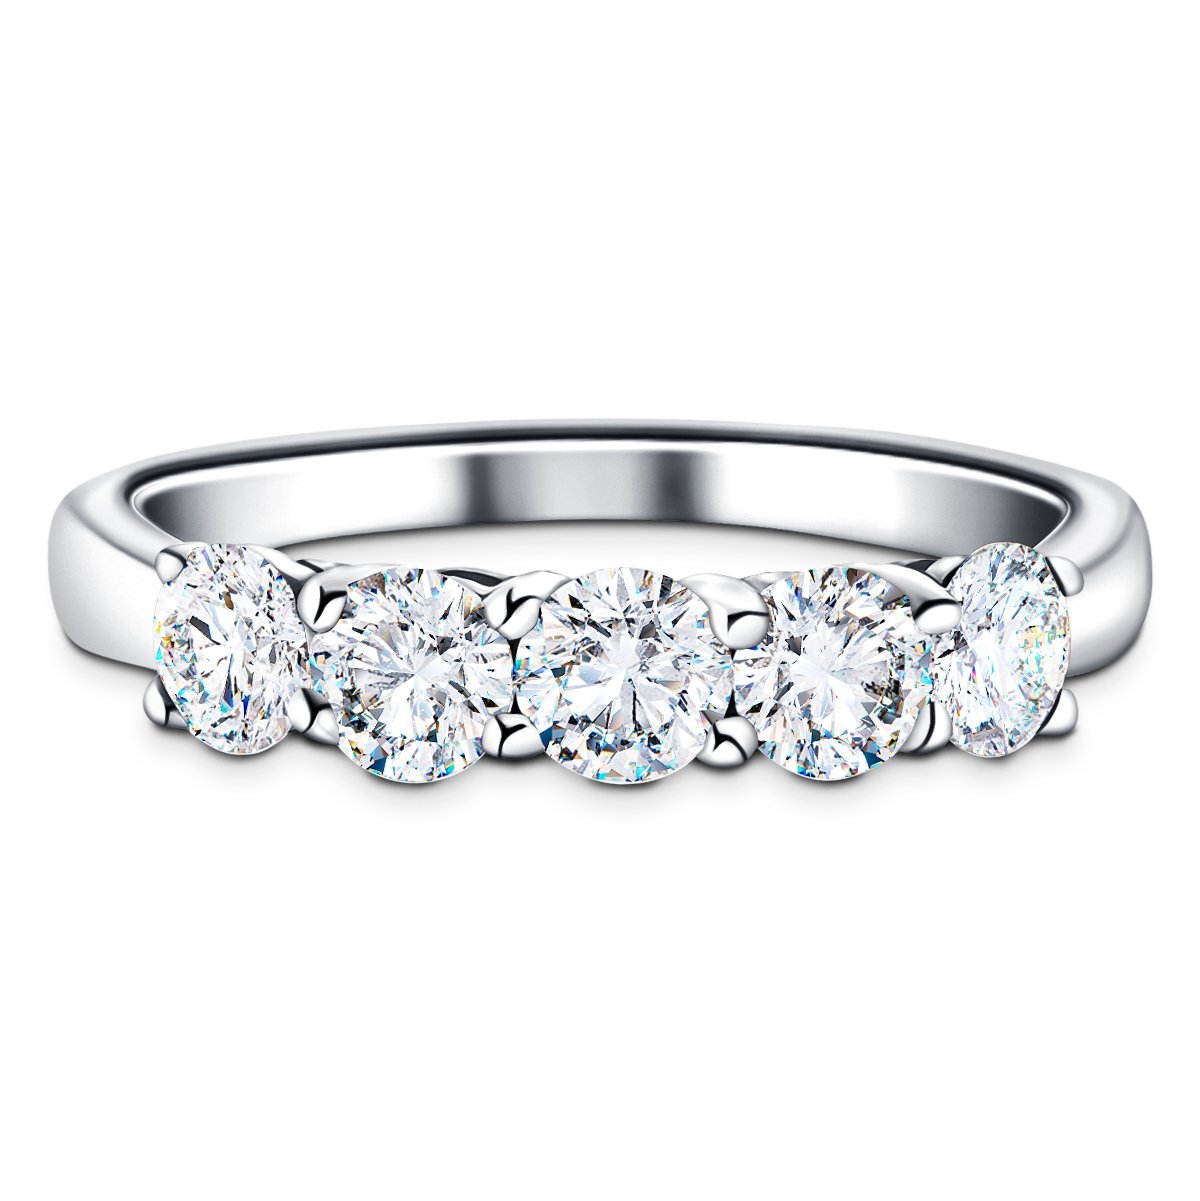 Classic Five Stone Ring with 1.50ct G/SI Quality Diamonds in Platinum - All Diamond